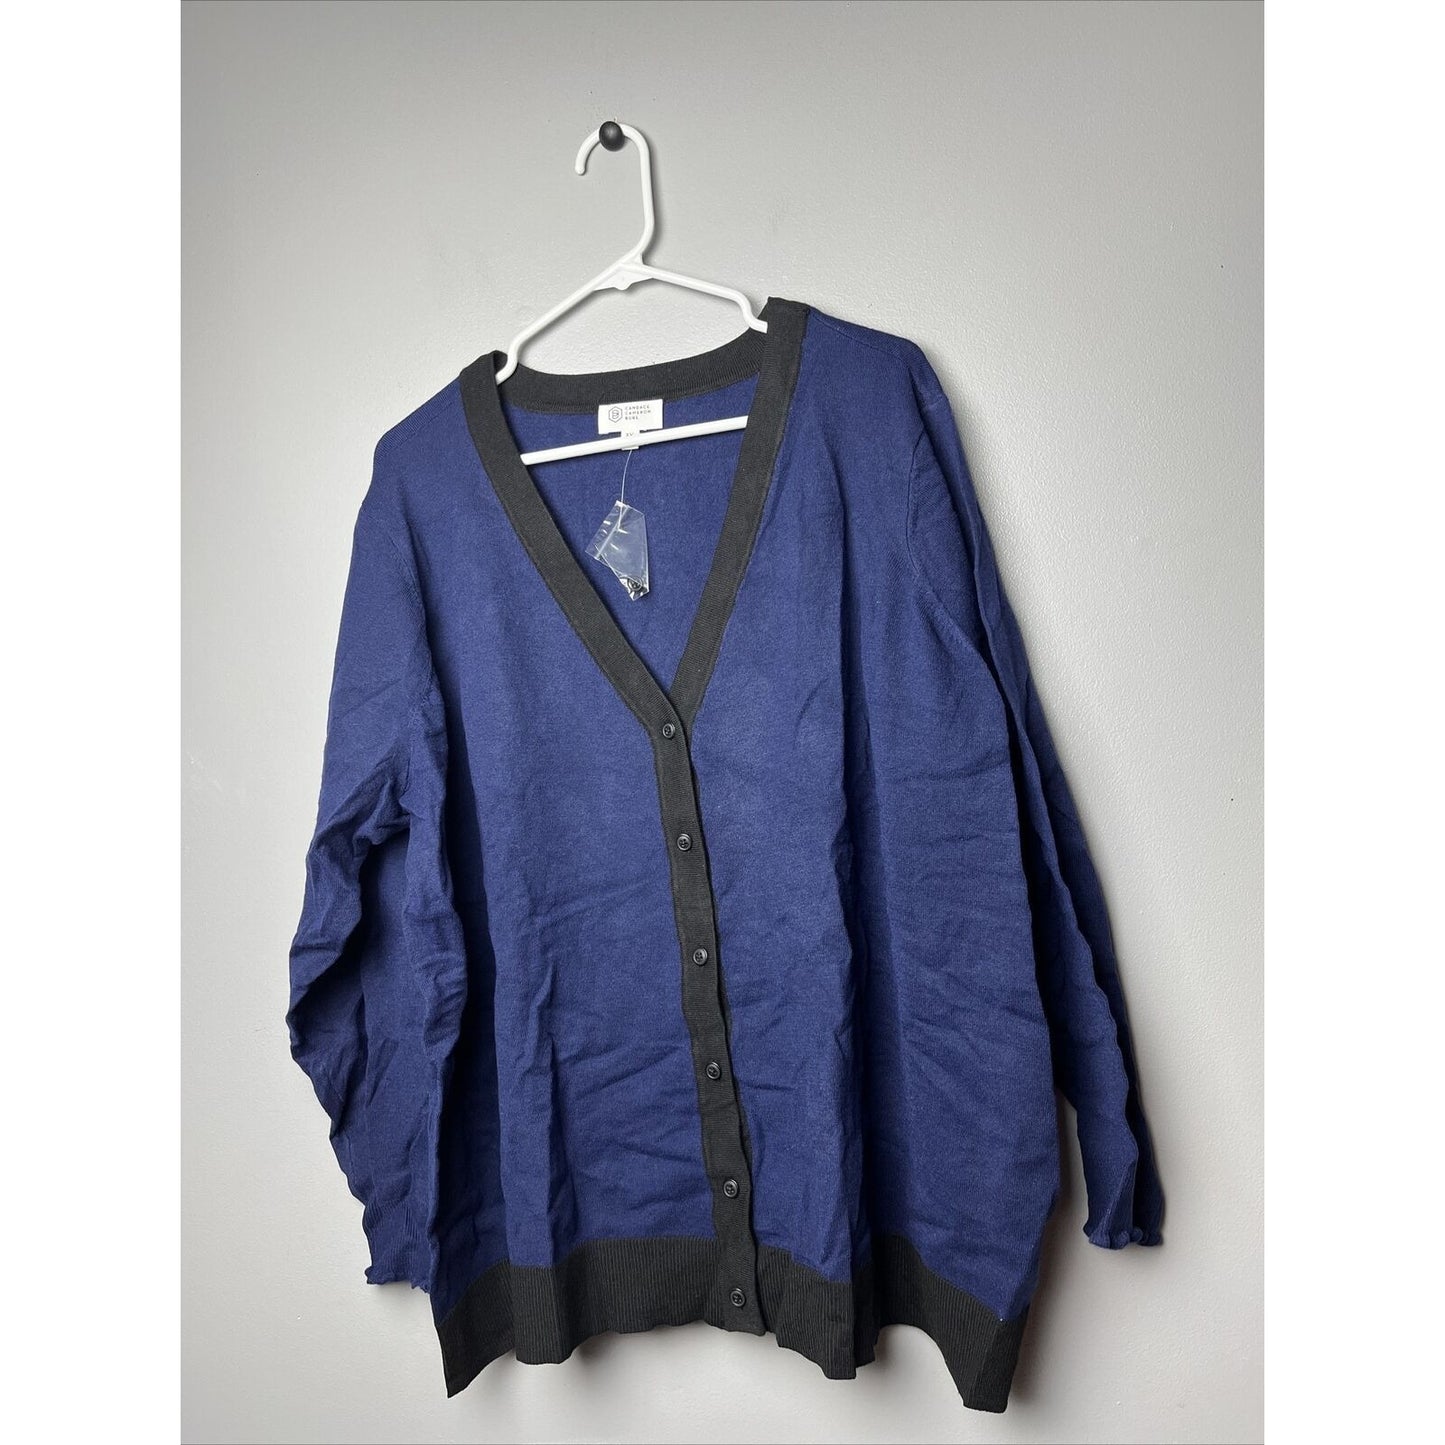 Candace Cameron Bure Surfside Button V-Neck Cardigan Navy/Washed Blk, 3X A516600